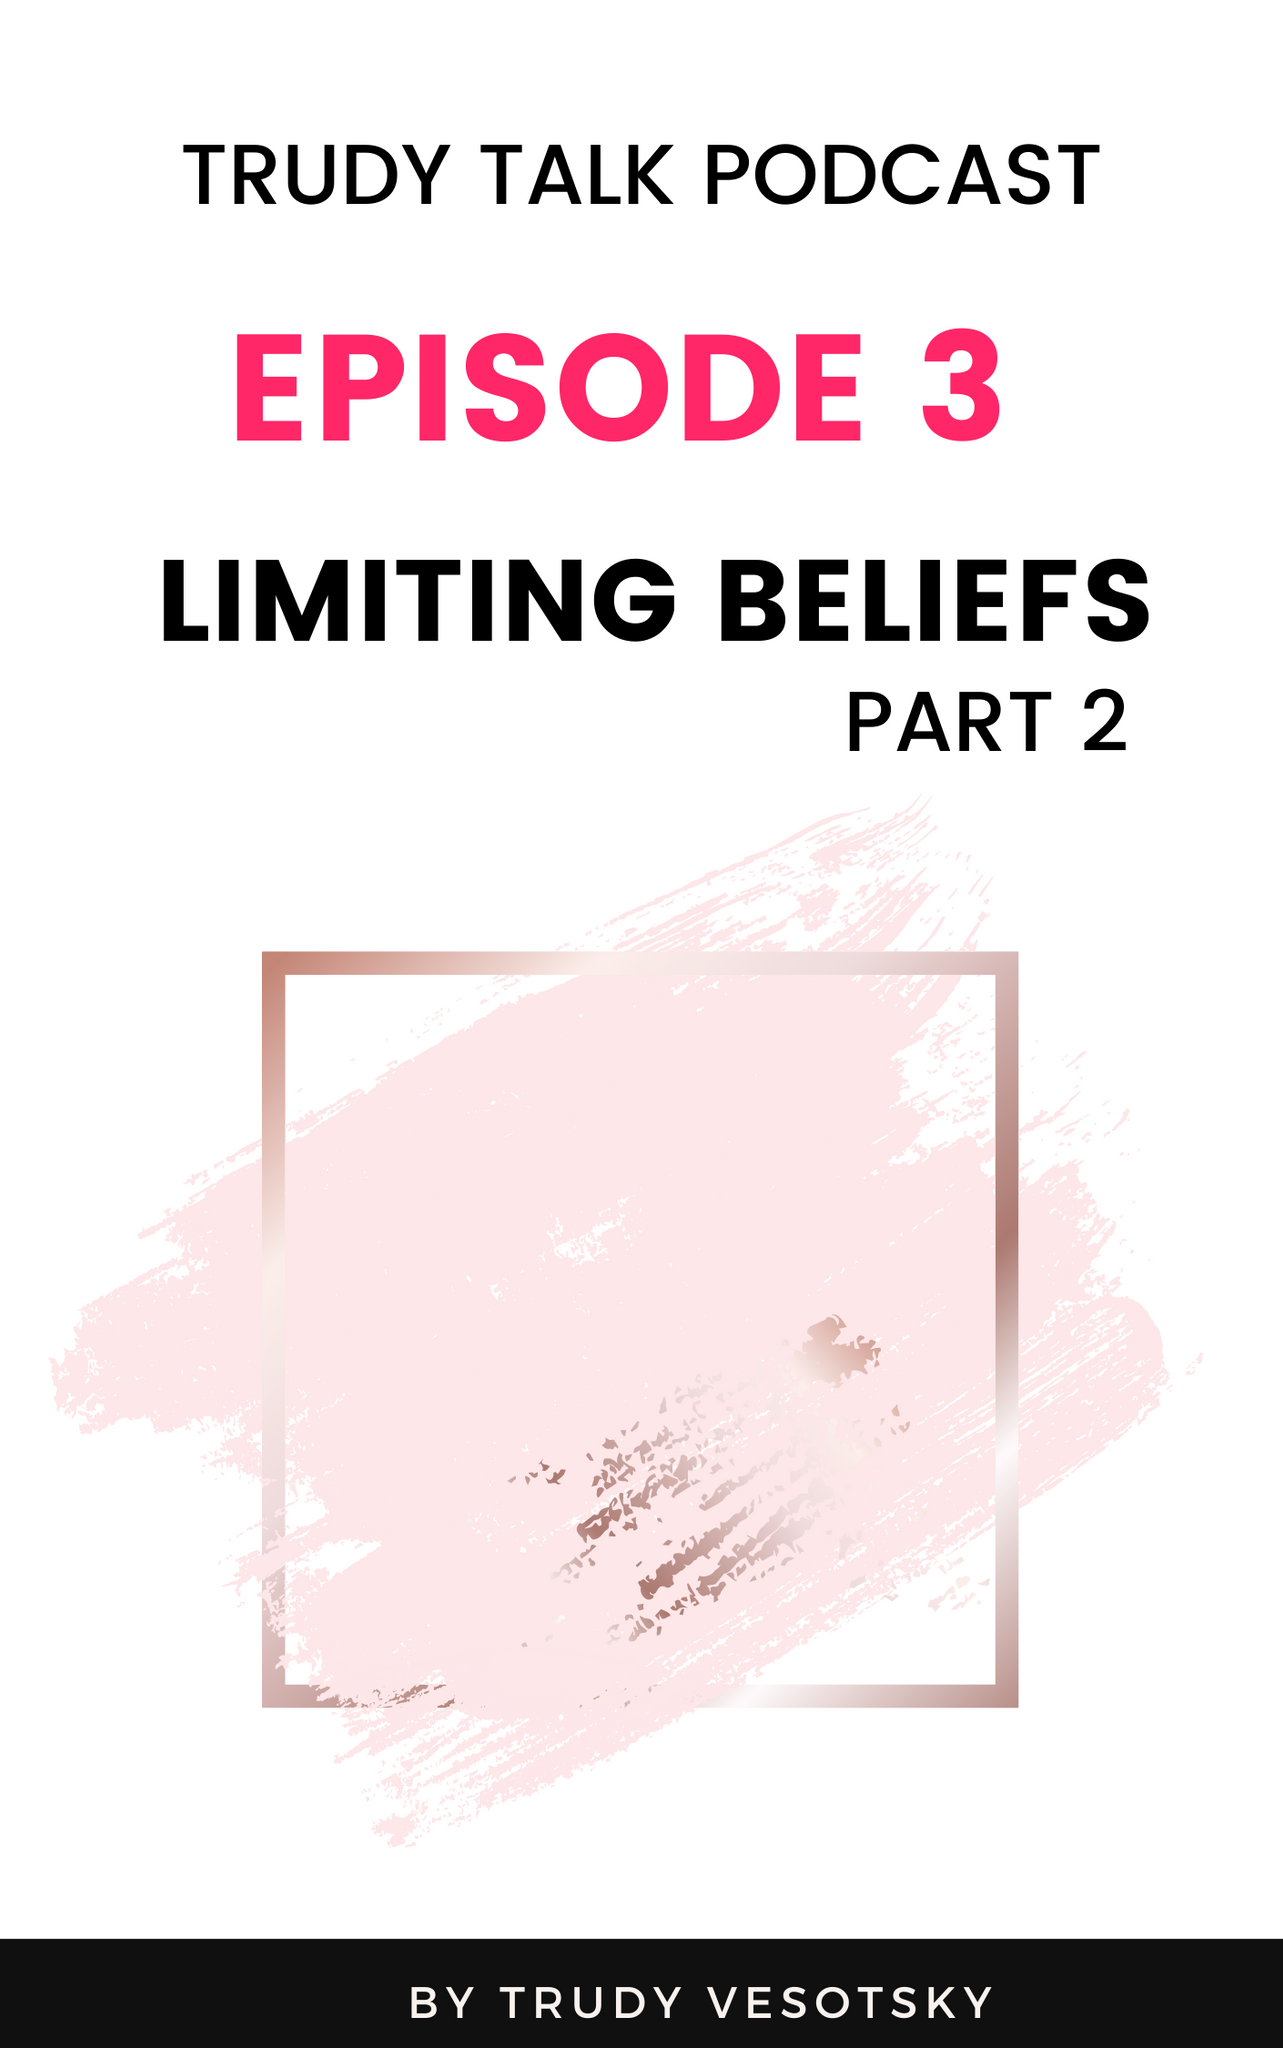 Trudy Talk Podcast - Episode 3 - Limiting Beliefs continued